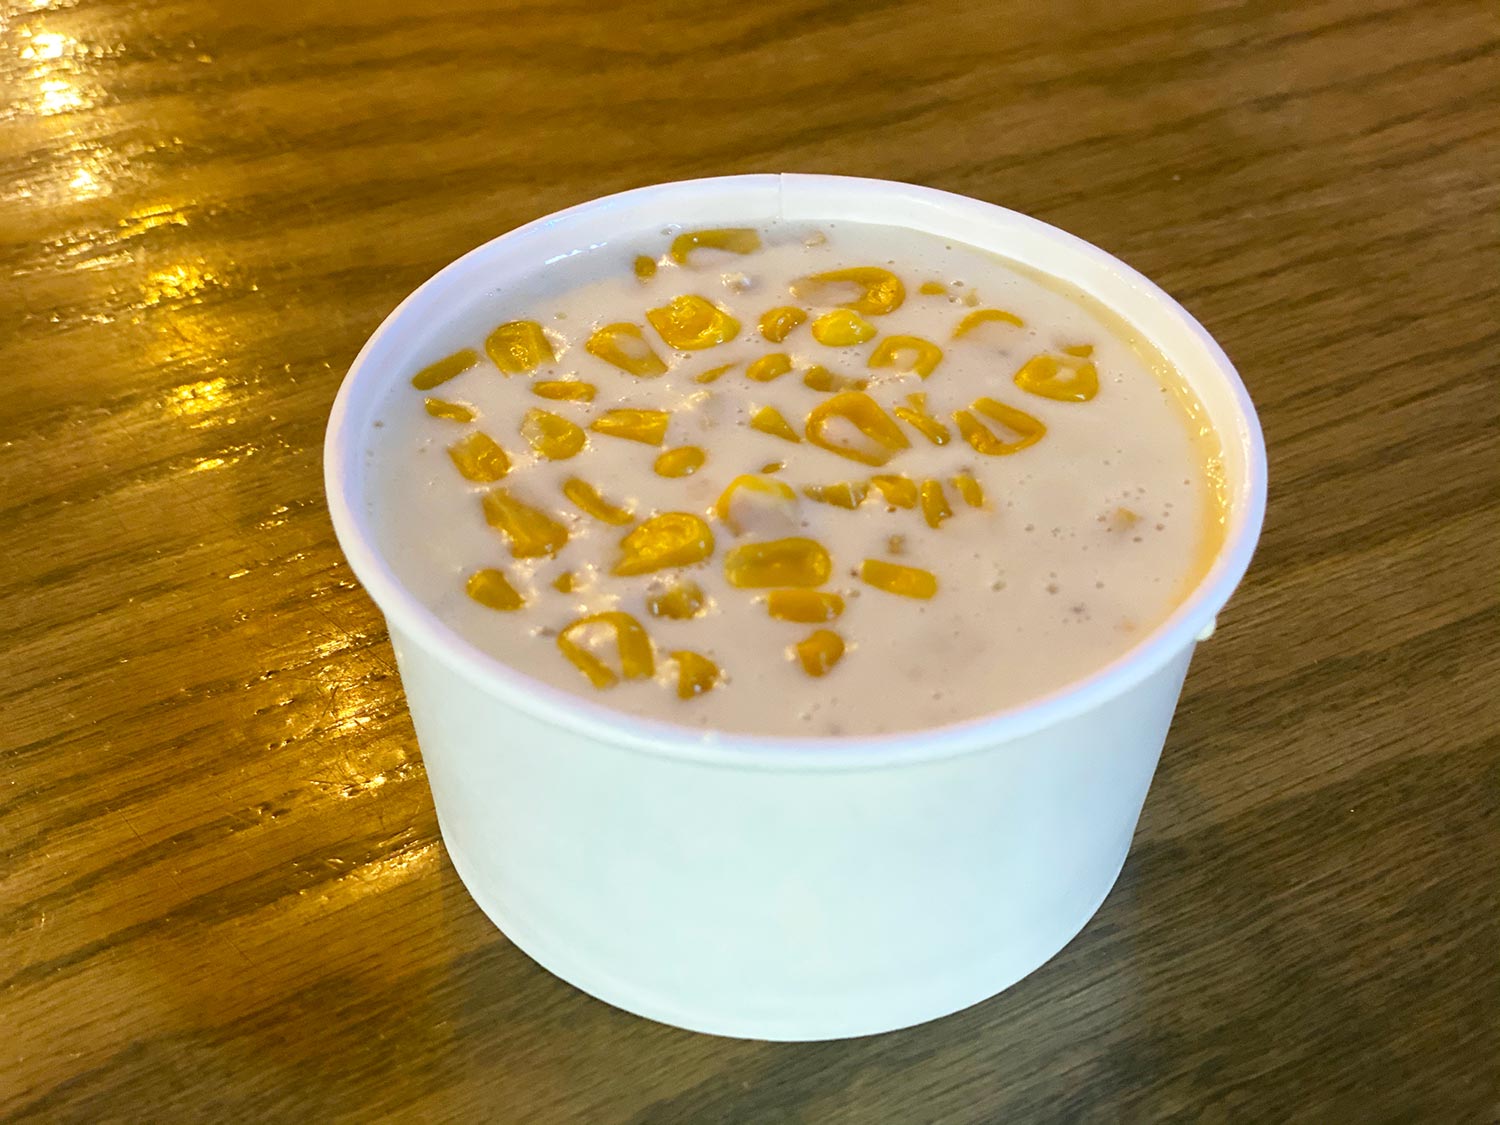 A side order of creamed corn at Old 300 BBQ